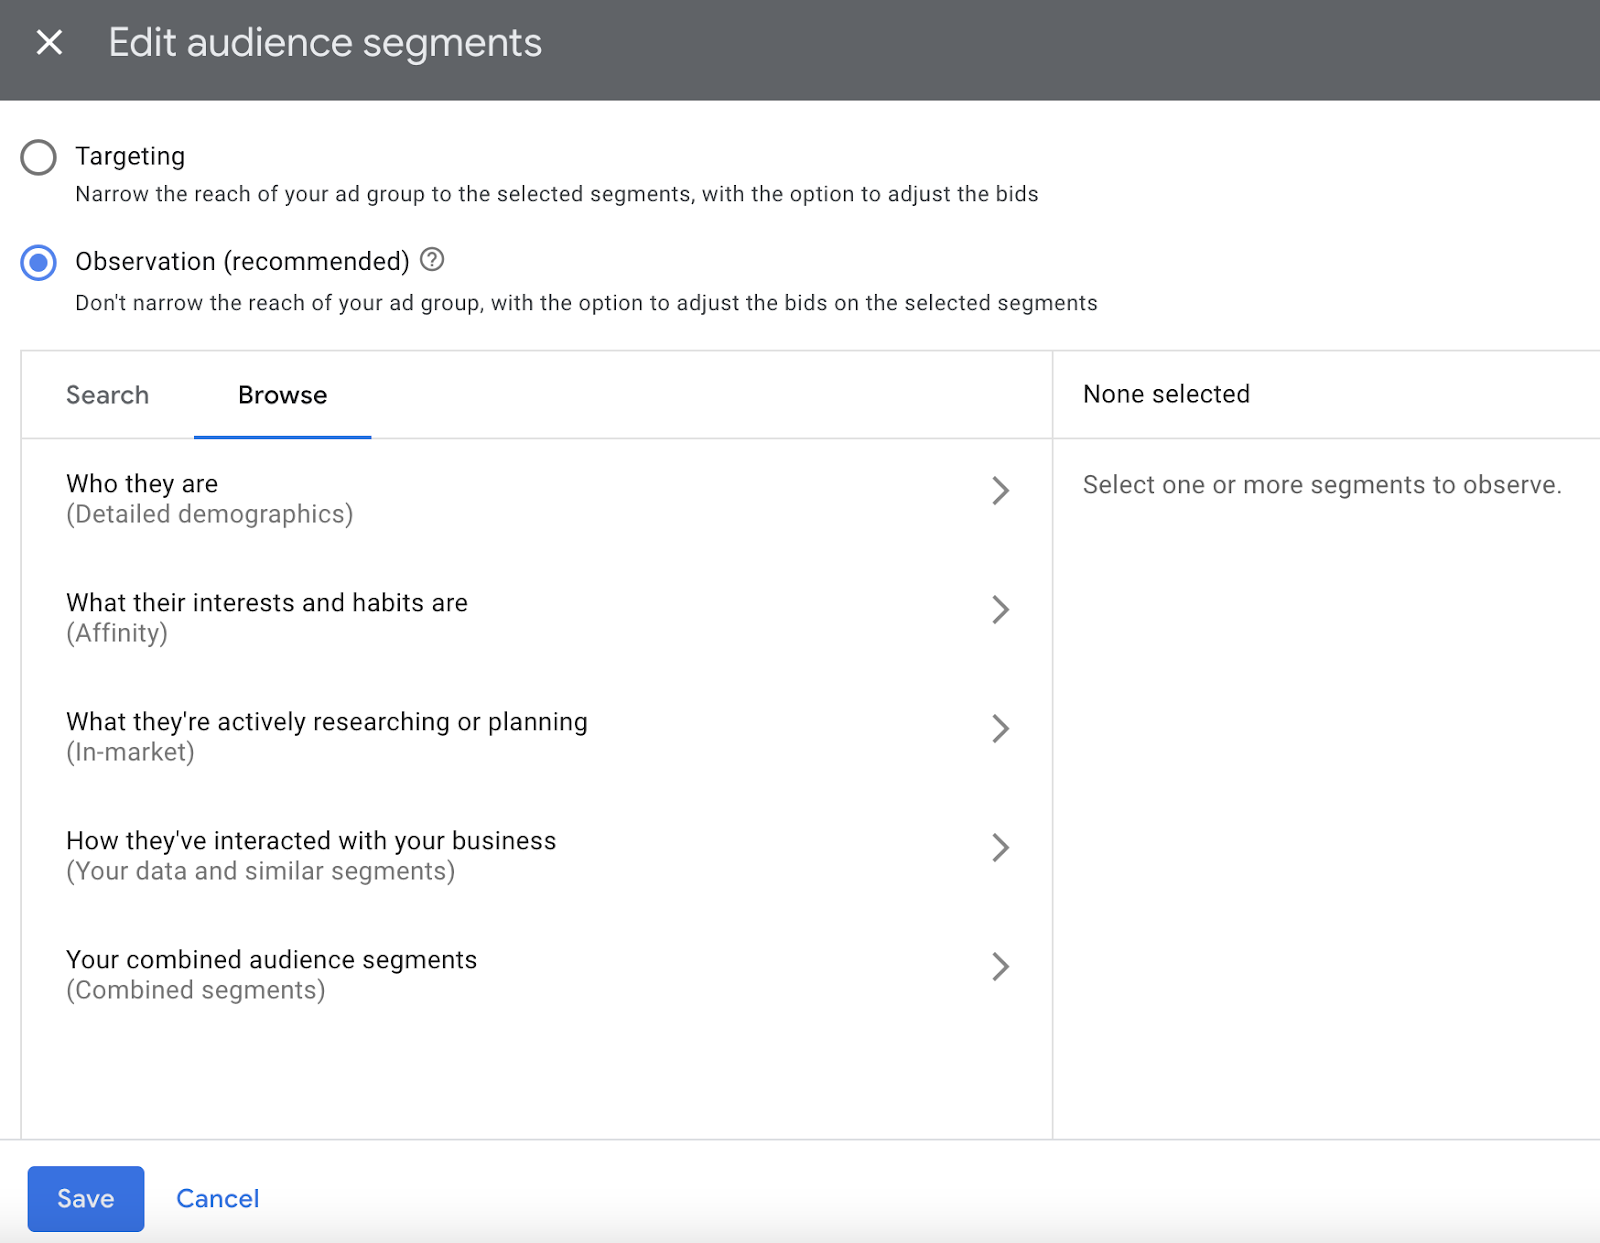 YouTube audience segments: Shows detailed demographics, affinity, in-market, your data and similar, and combined segments